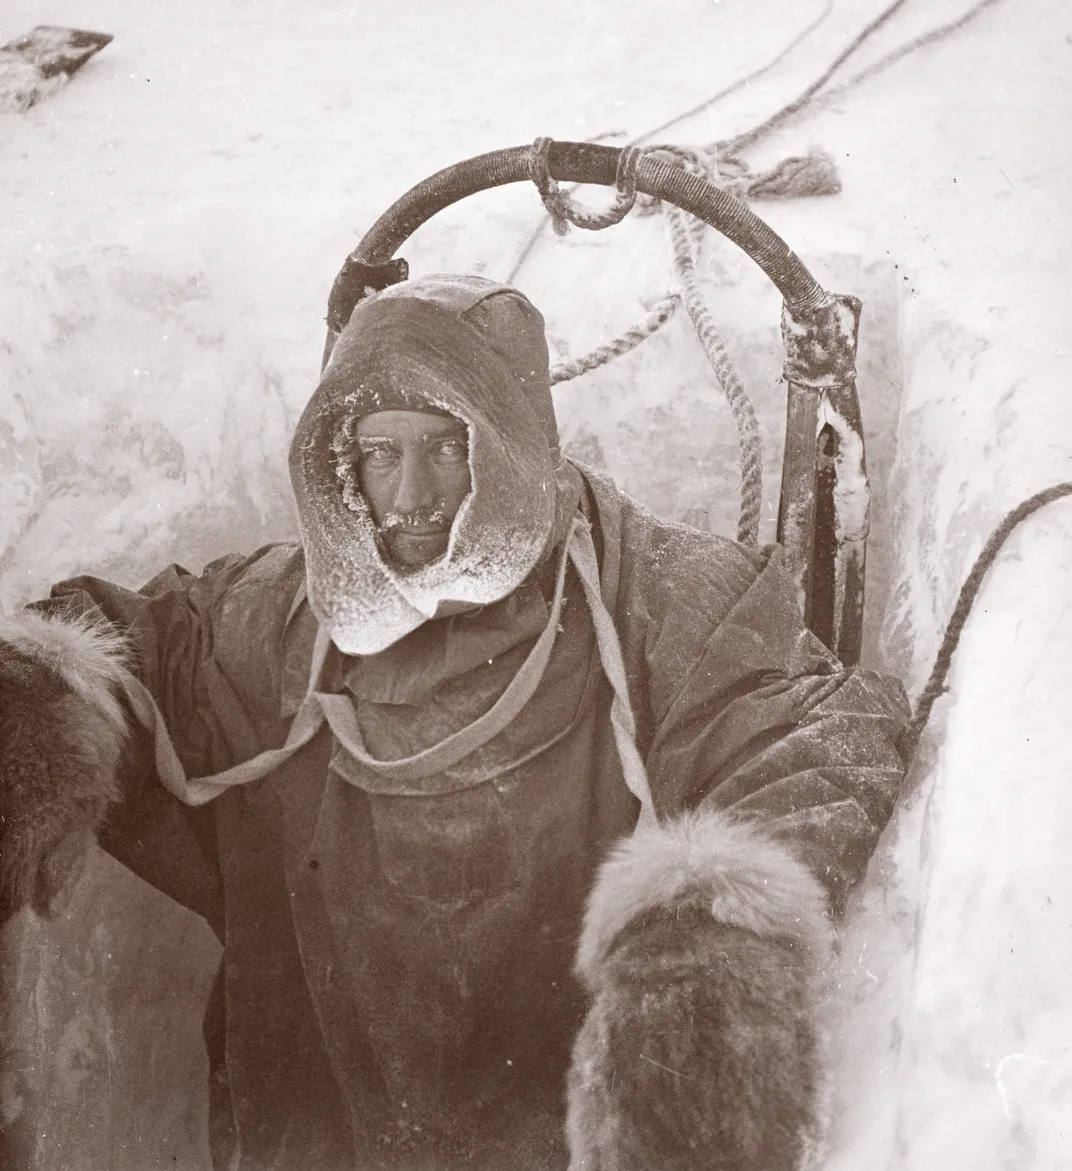 Man wearing cold-weather gear in ice hole